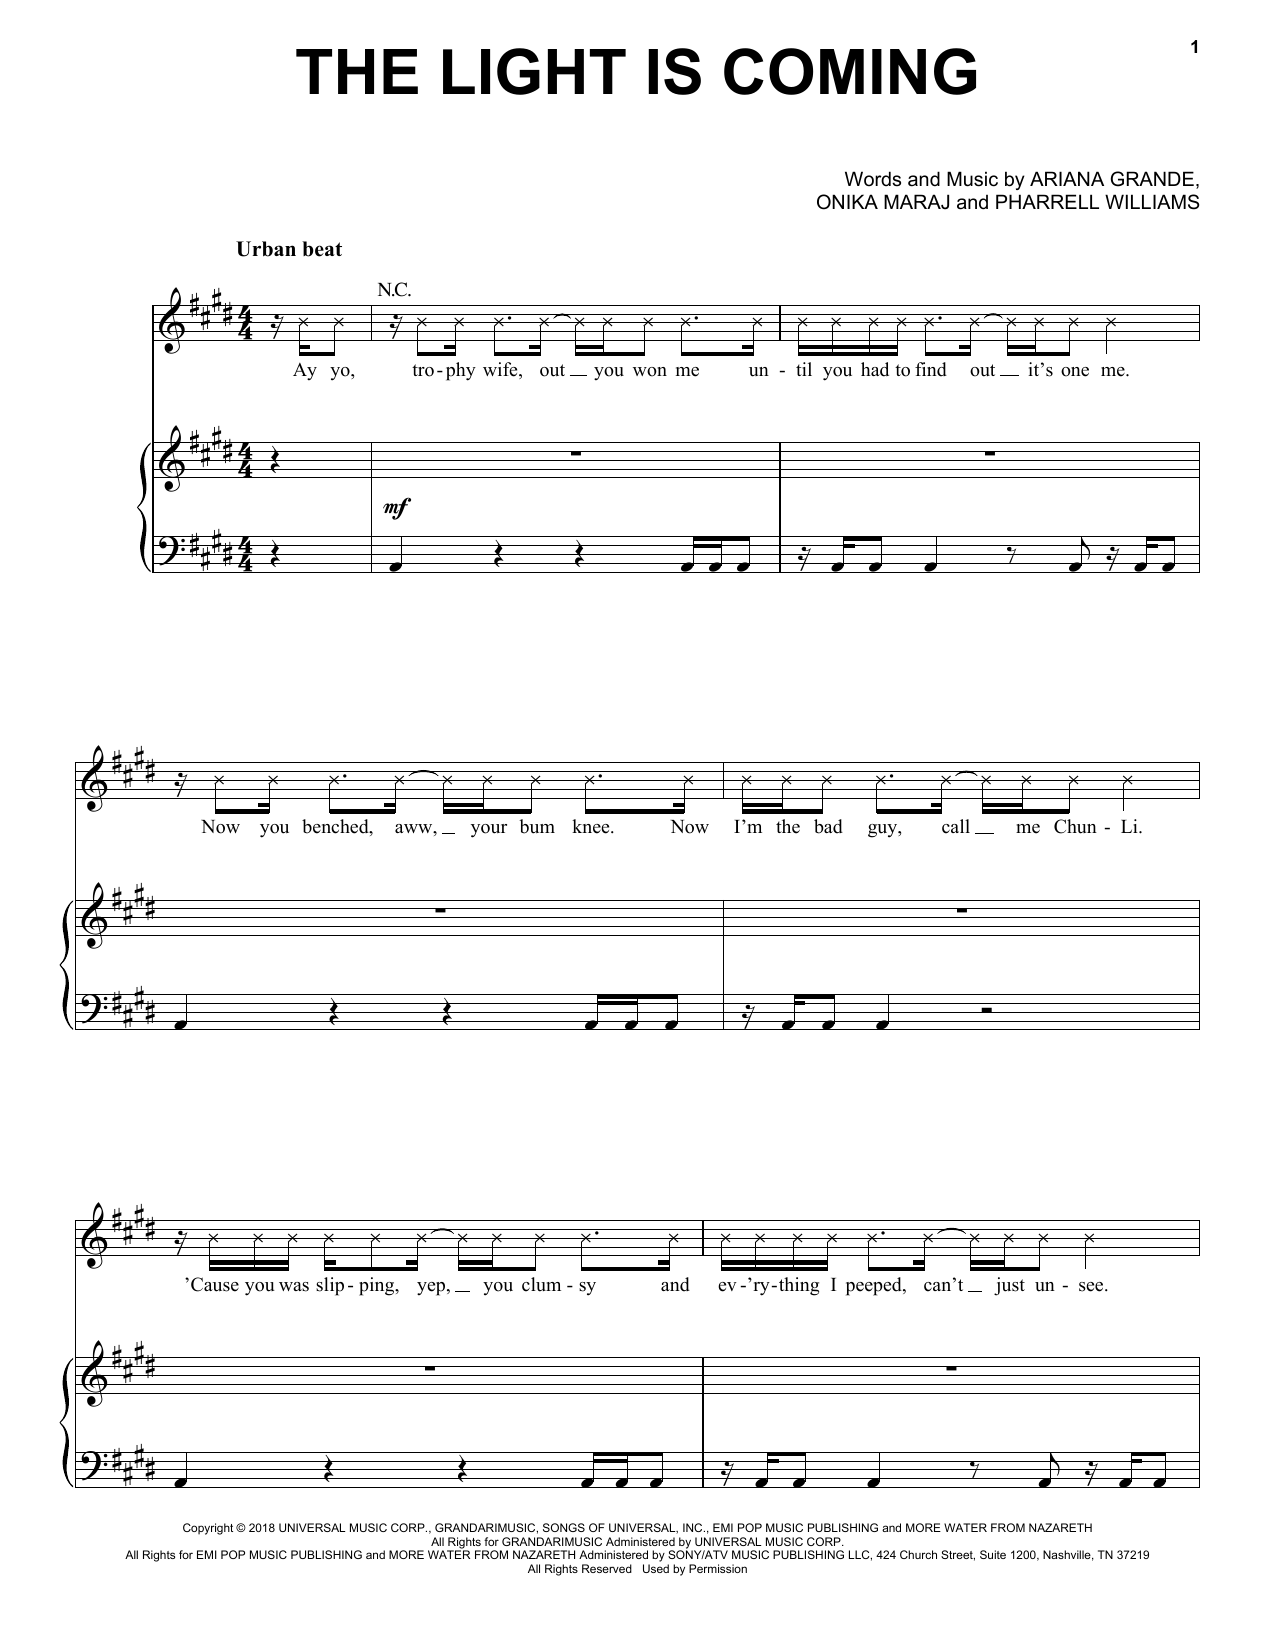 Download Ariana Grande The Light Is Coming Sheet Music